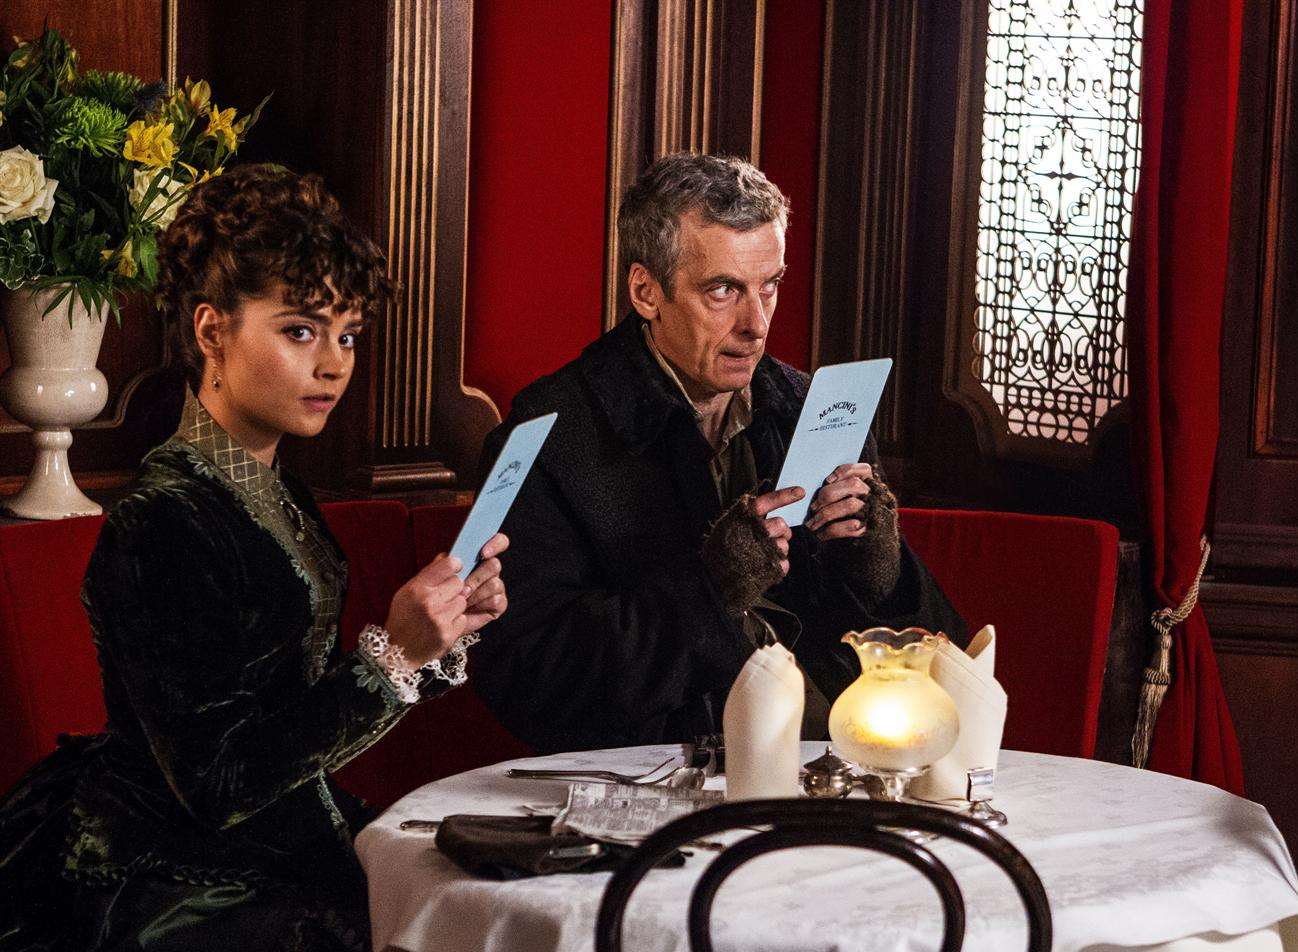 Clare (Jenna Coleman) and The Doctor (Peter Capaldi)